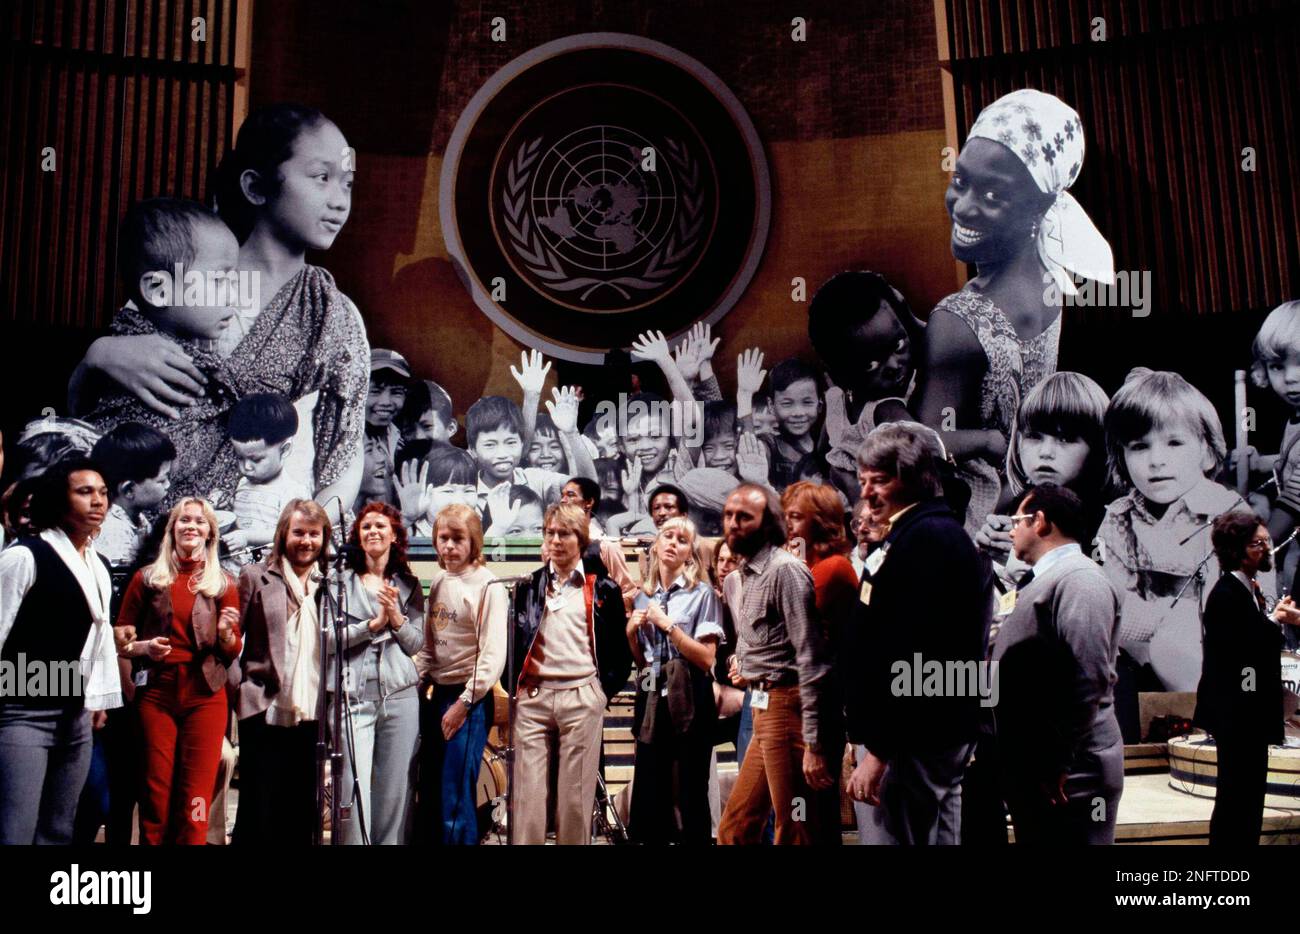 Assembled before giant photo mural are, from left, Rita Coolidge, four members of ABBA, John Denver, Olivia Newton John Gibb, Andy Gibb, of the BEE GEES. They are shown at United Nations General Assembly, Tuesday evening, January 9, 1979 in New York, during taping of NBC-TV Special, "The Music for UNICEF concert." (AP Photo/Ron Frehm) Foto Stock